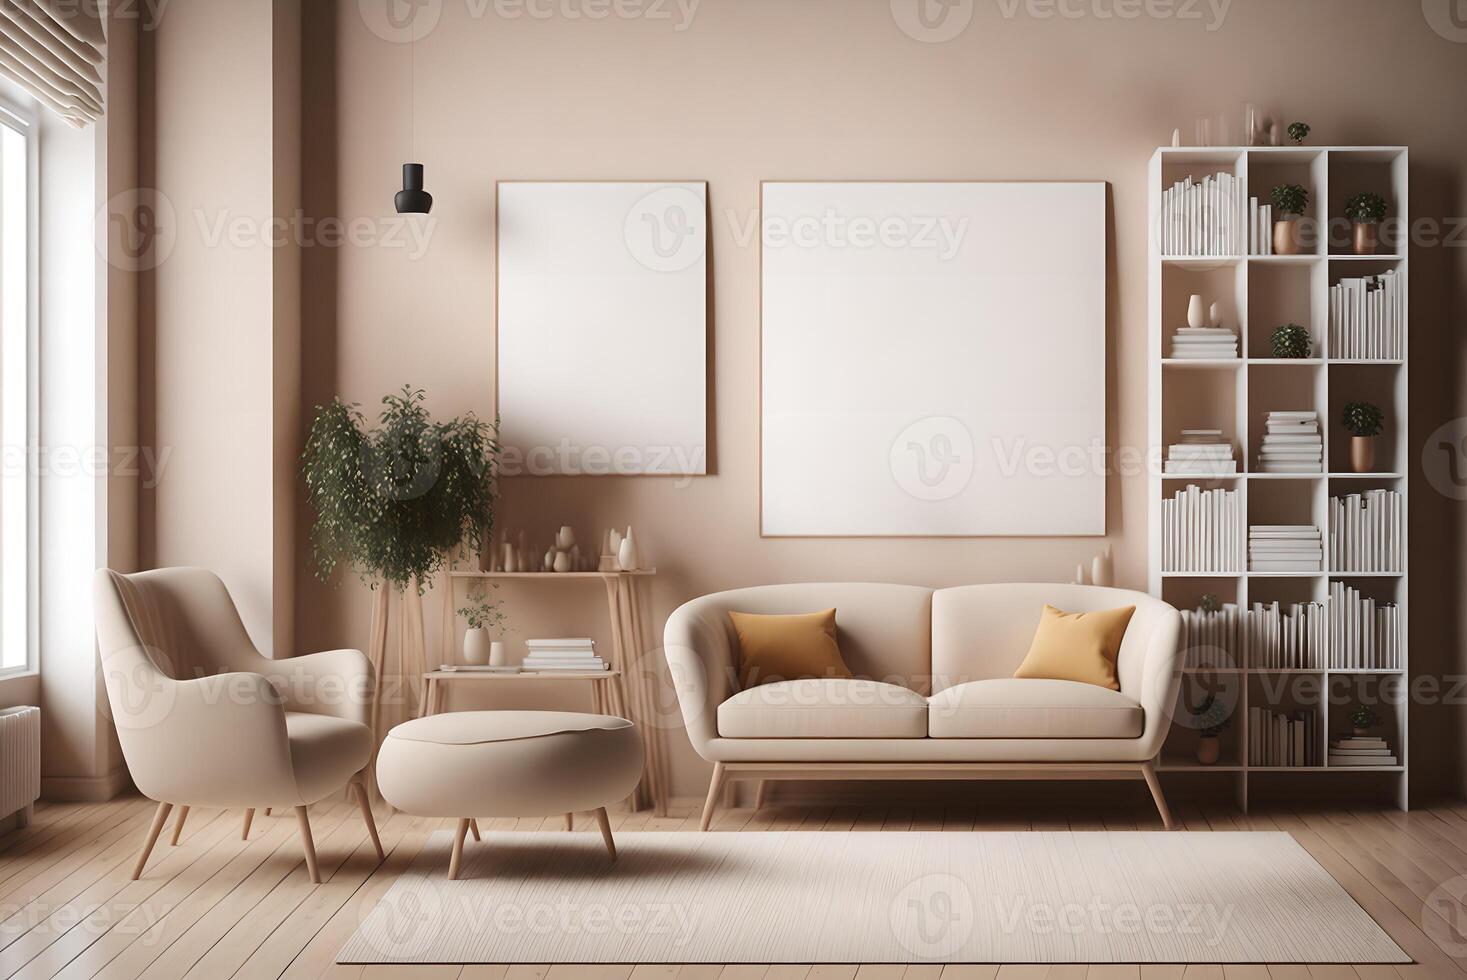 beige room interior with two armchairs and sofa, wooden bookshelf with books and decoration, carpet and parquet floor. mockup blank copy space frame poster, 3d rendering, photo